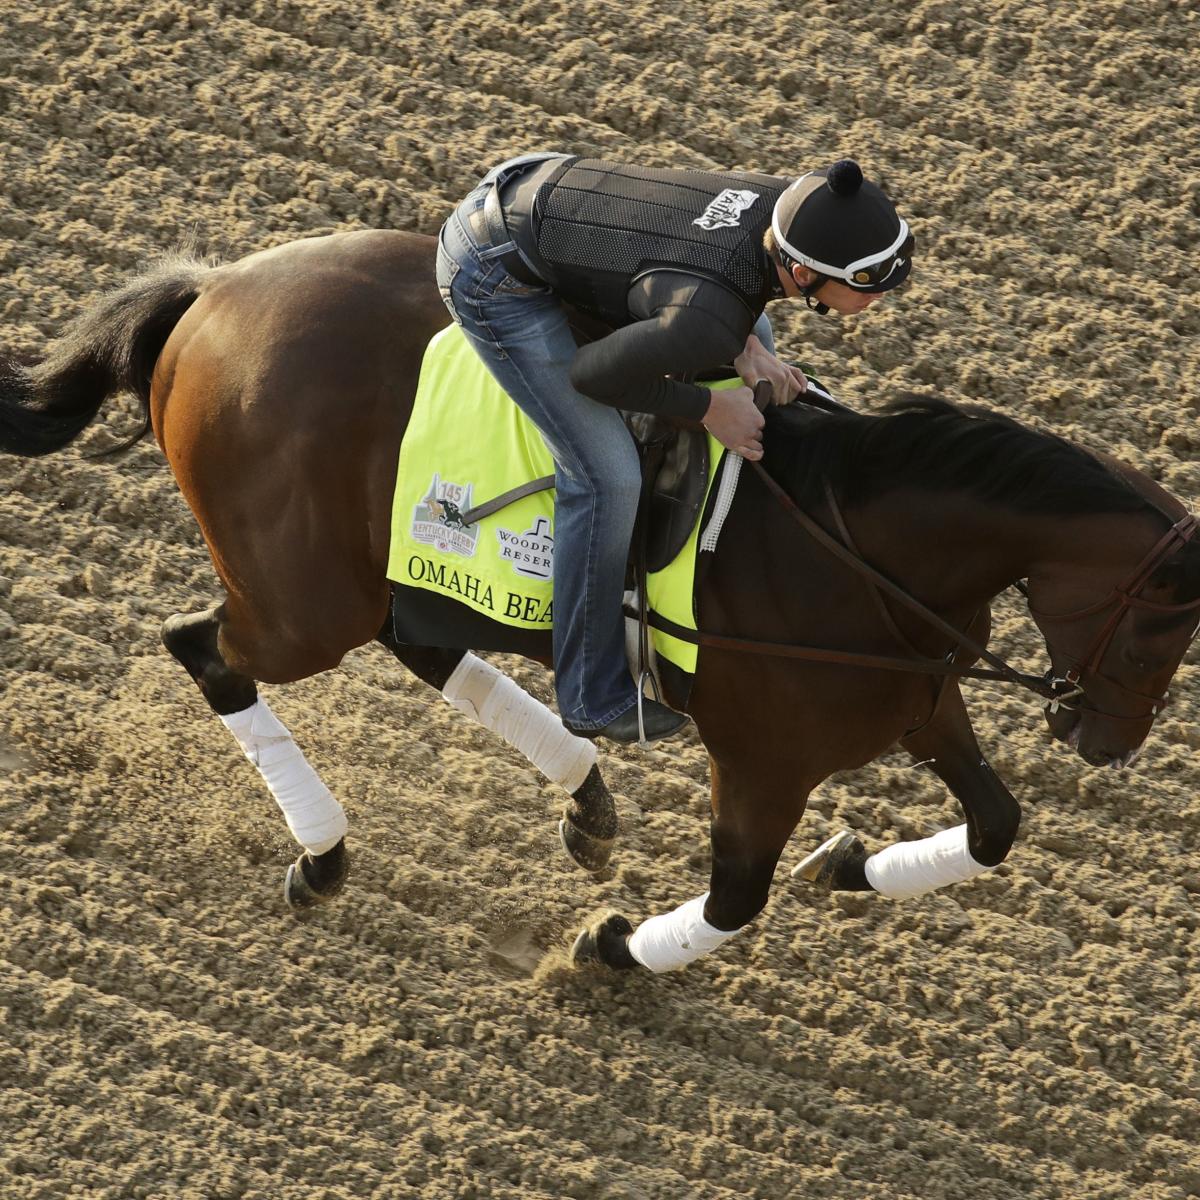 Kentucky Derby 2019 Odds Picks and Predictions Based on Recent Betting